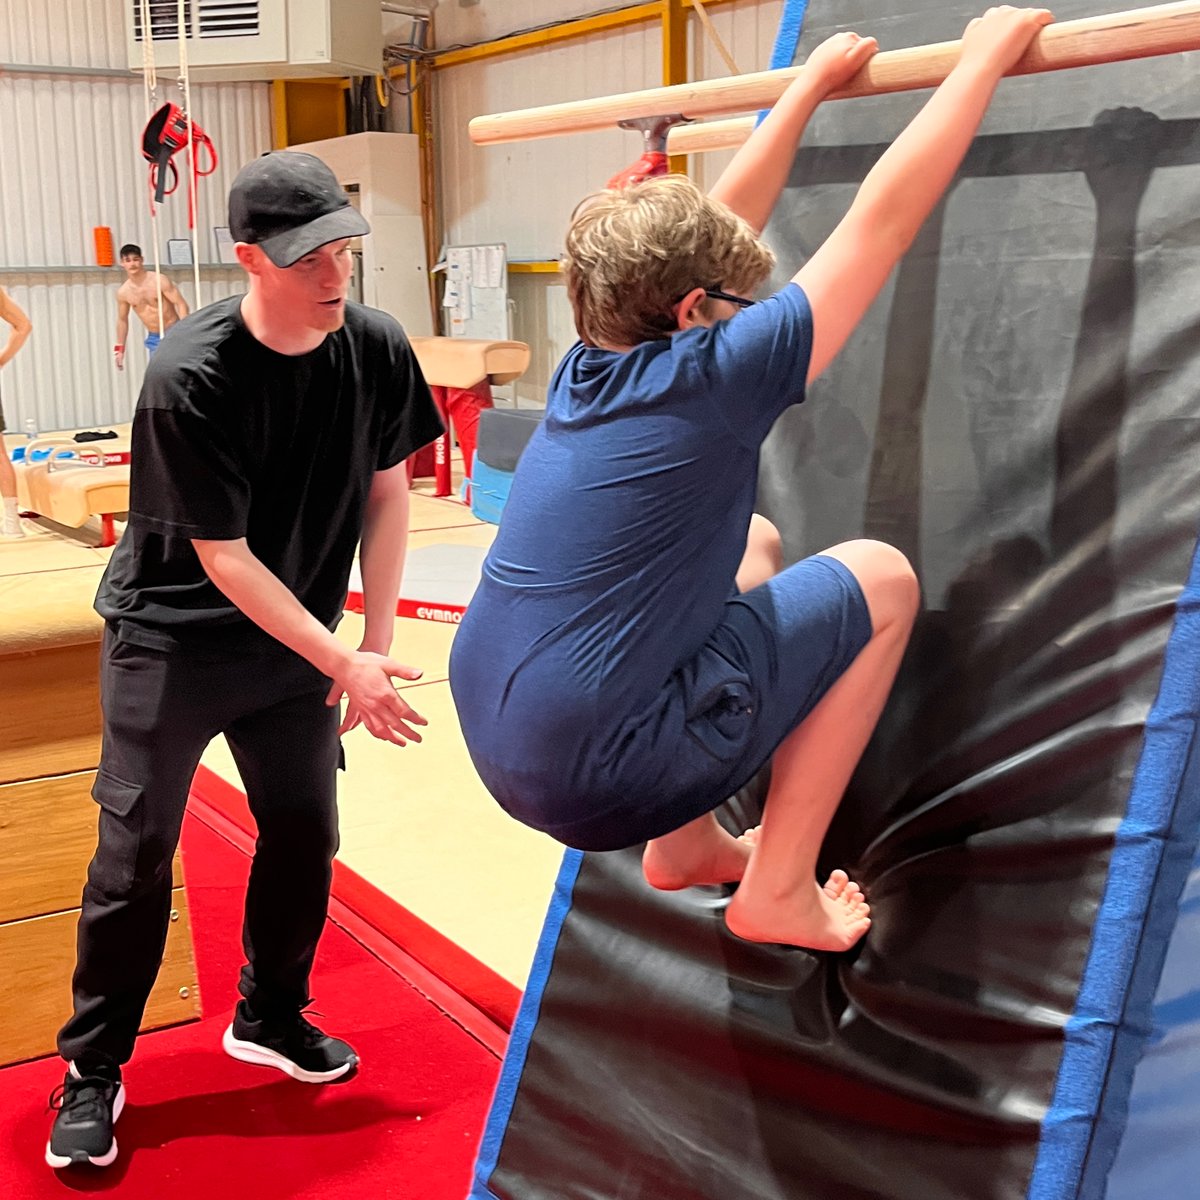 Do you Home Ed? We have two classes each week for those who Home Ed - Tuesday 1.30 (gymnastics) for ages 4-11 and Wednesday 2pm (FREERUNNING) for older kids and teens! No need to book - just drop in and try a class @ VGA, Croespenmaen Ind Set, NP11 3AG @CaerphillyCBC